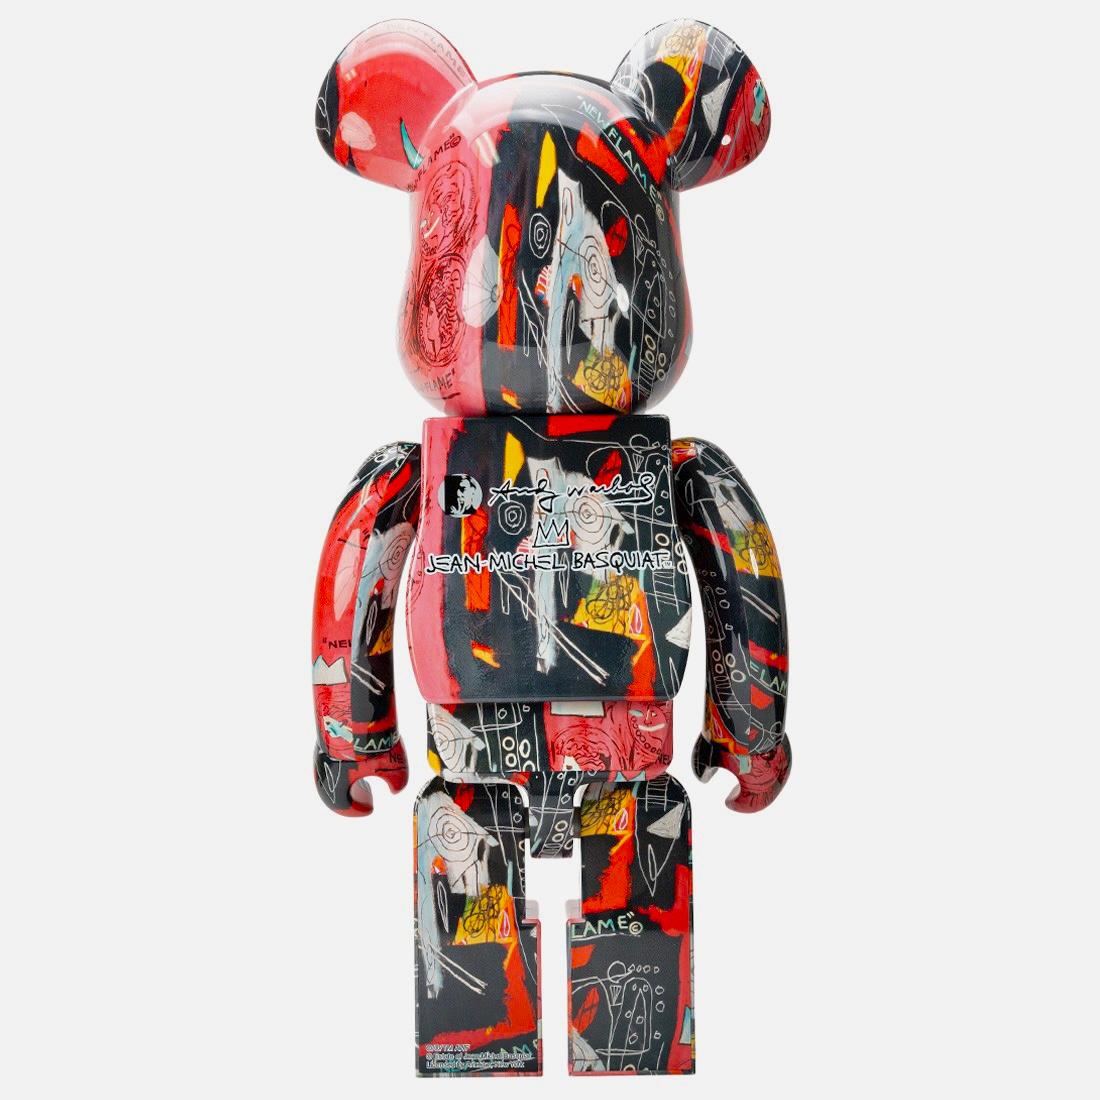 Be@rbrick x Warhol and Basquiat Estates 400% and 100%, set of 2 works For Sale 4